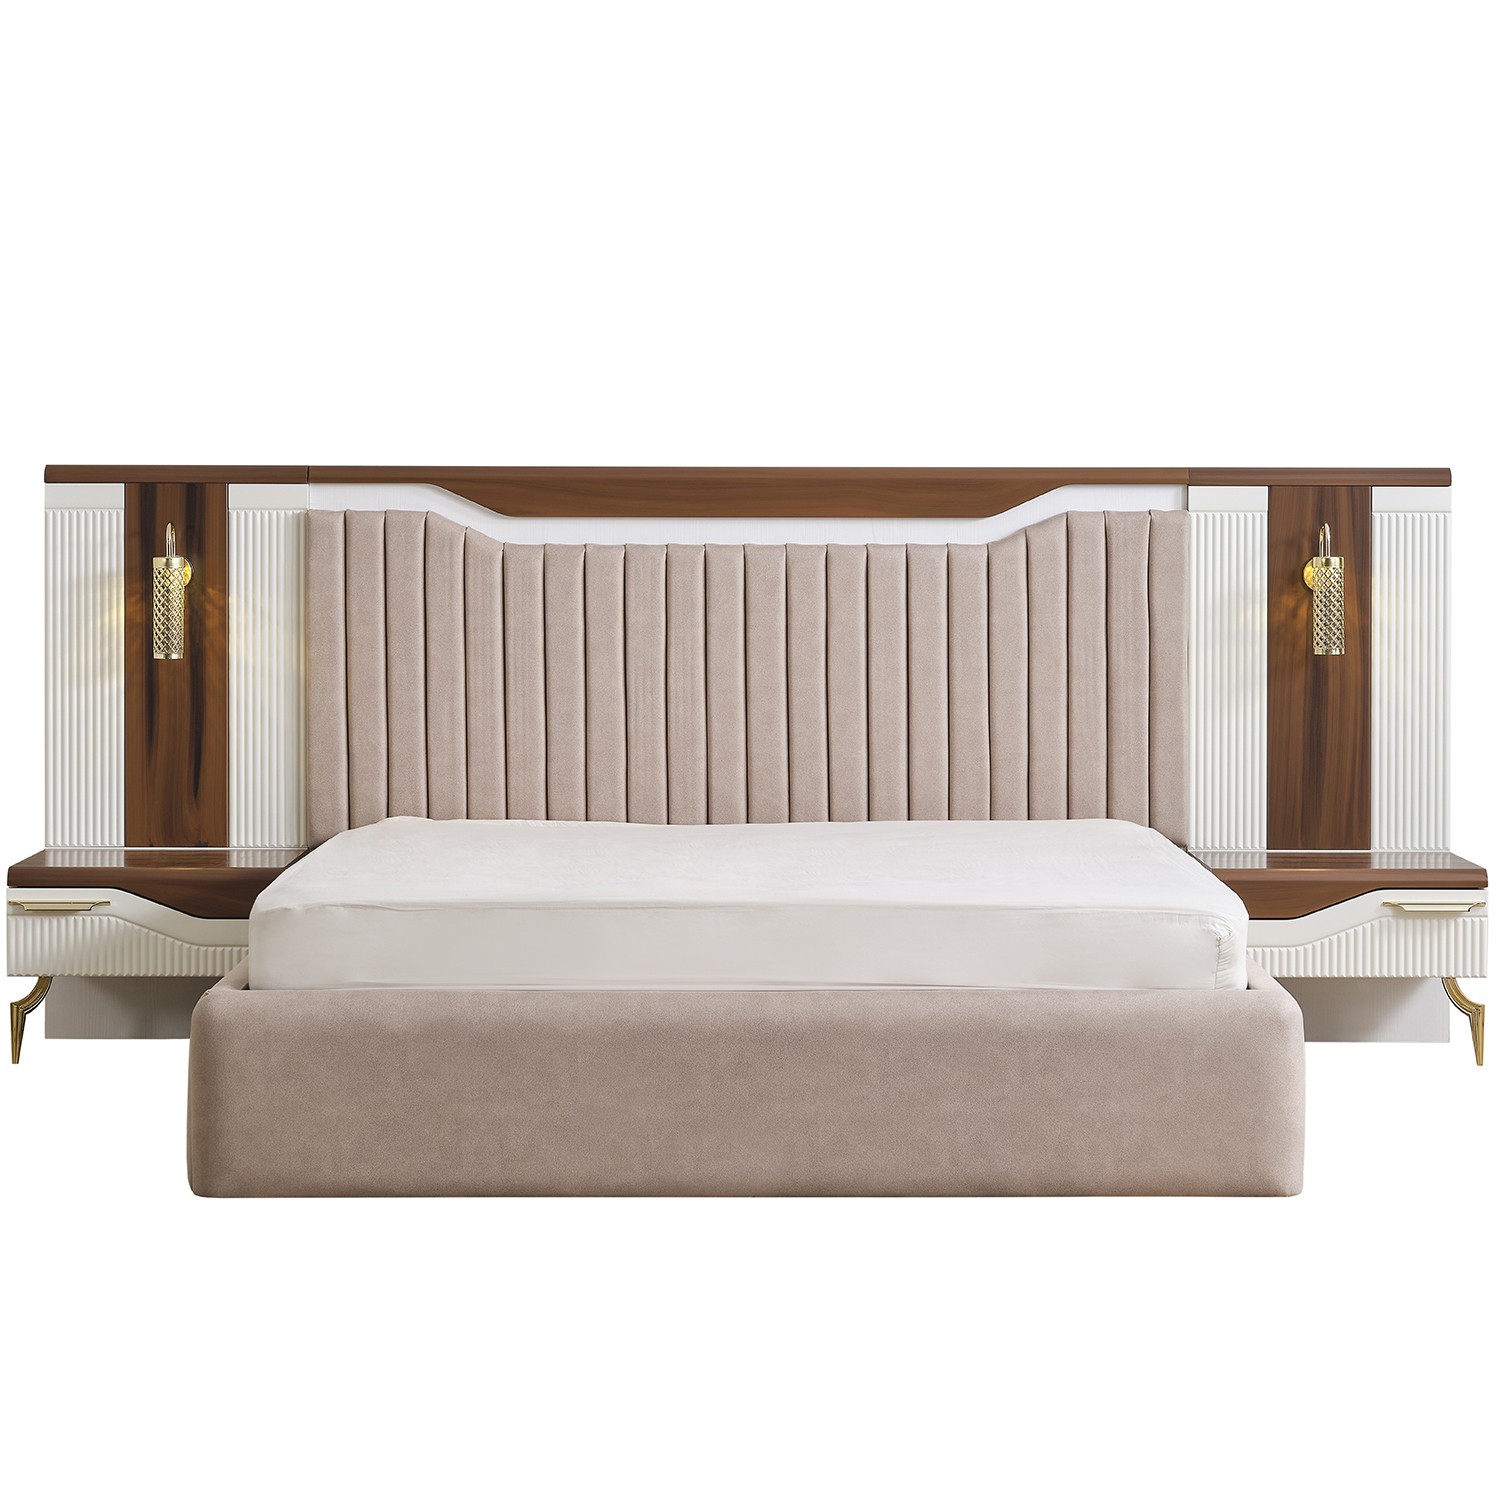 Style Hermes Vol1 Bed Without Storage 180x200 cm